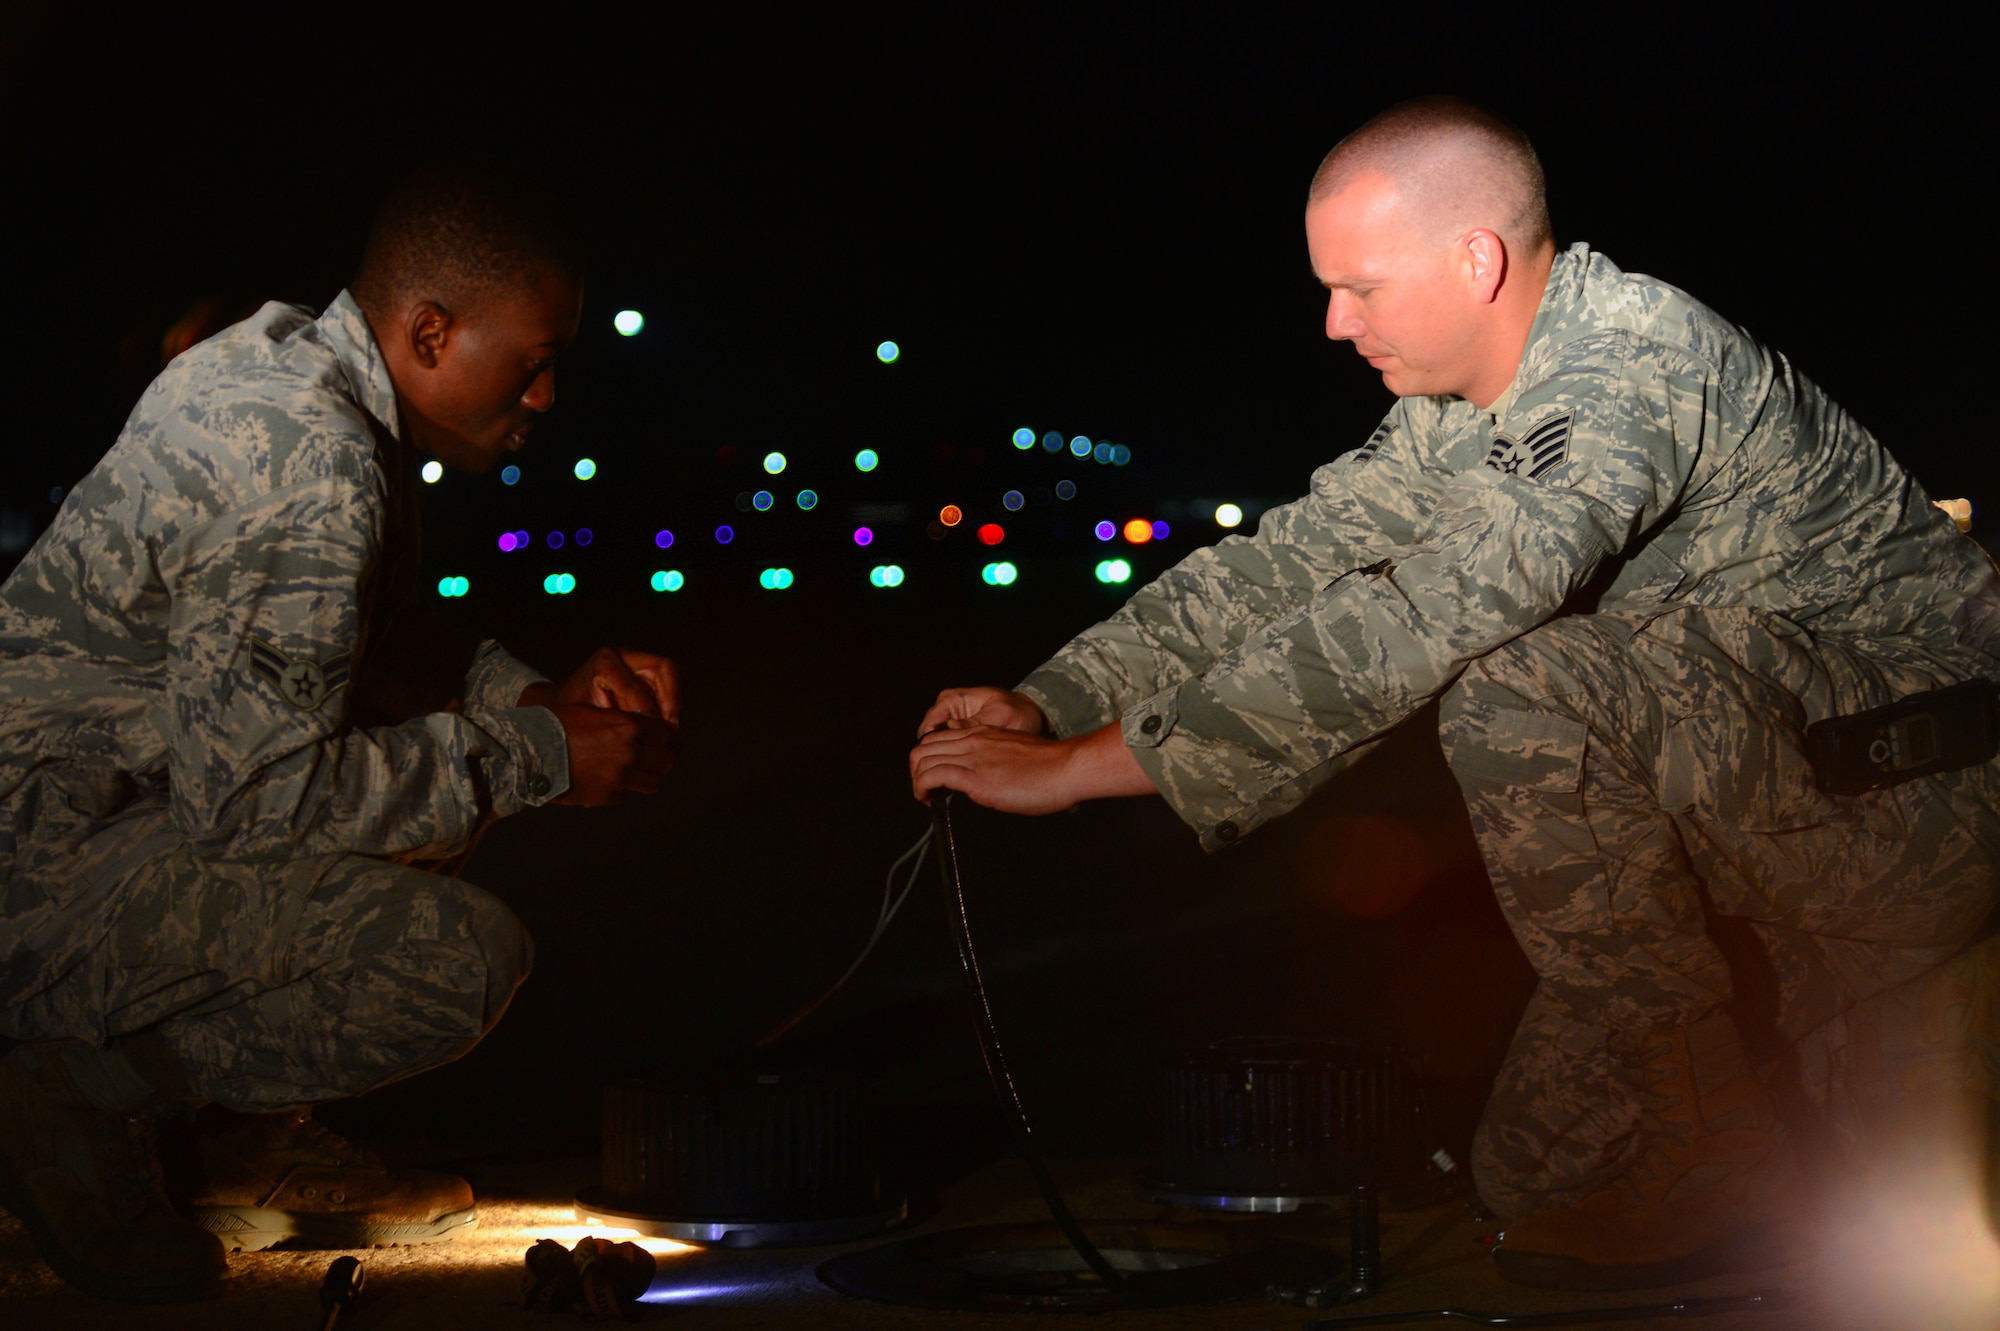 U.S. Air Force Airman 1st Class Ernest Kuma, 20th Civil Engineer Squadron electrical systems journeyman and Staff Sgt. Nicholes Crumb, 20th CES electrical systems craftsman, install a new approach light on the runway at Shaw Air Force Base, S.C., July 16, 2014. More than 20 rows of five lights line the ends of the runway, ensuring pilots know where the start of the runway is. (U.S. Air Force photo by Airman 1st Class Jensen Stidham/Released)